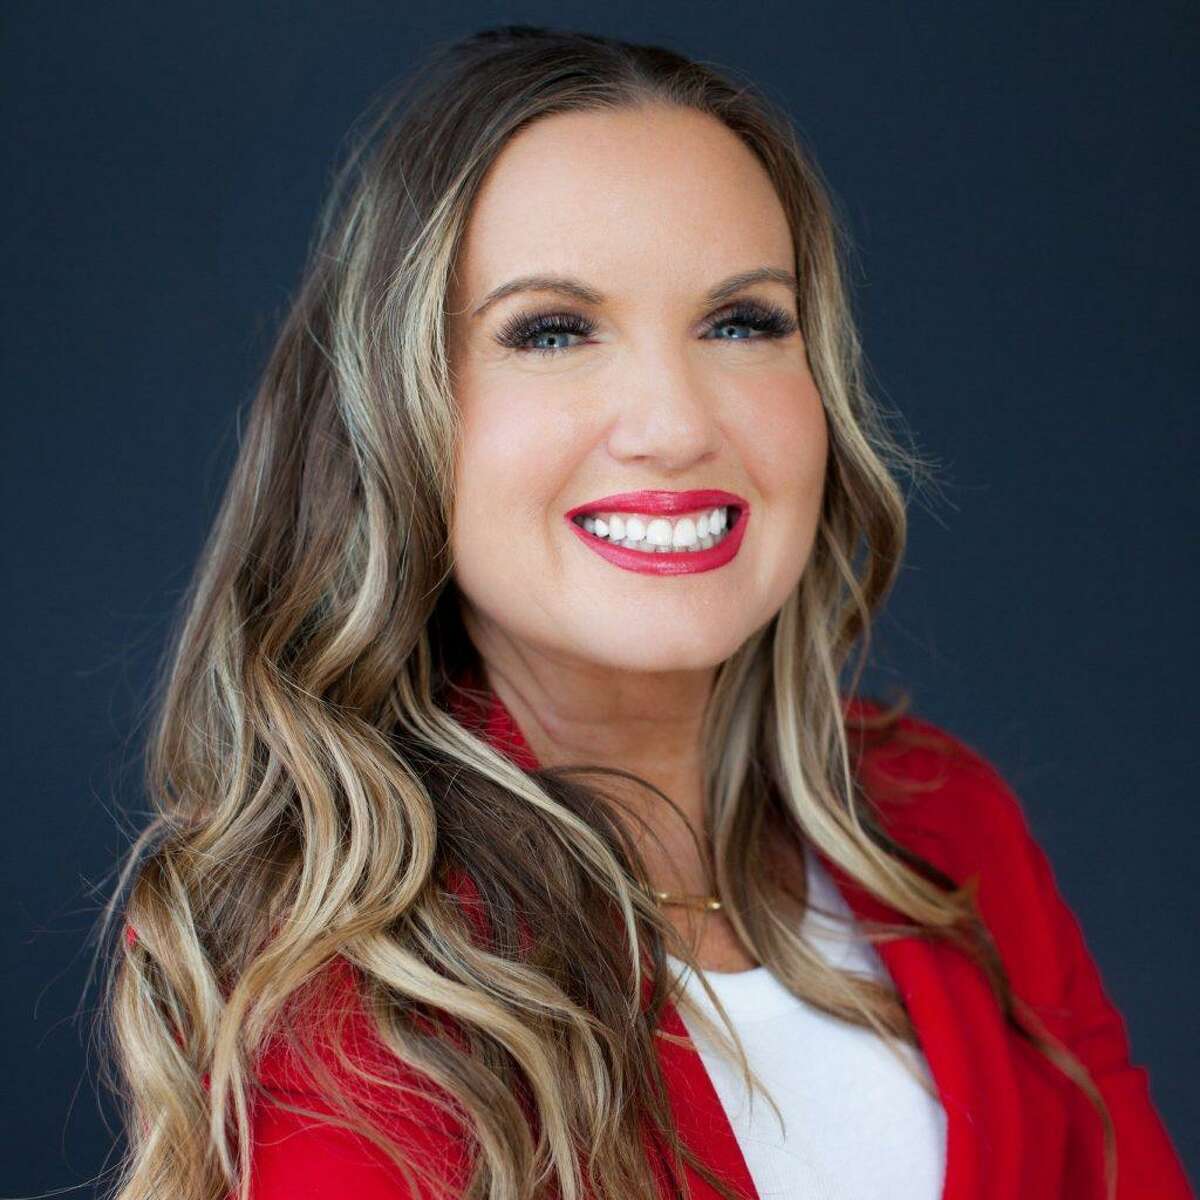 Business owner Misty Dawson is running for Clear Creek ISD's District 1 trustee seat. Her opponent is real estate agent Jessica Cejka.